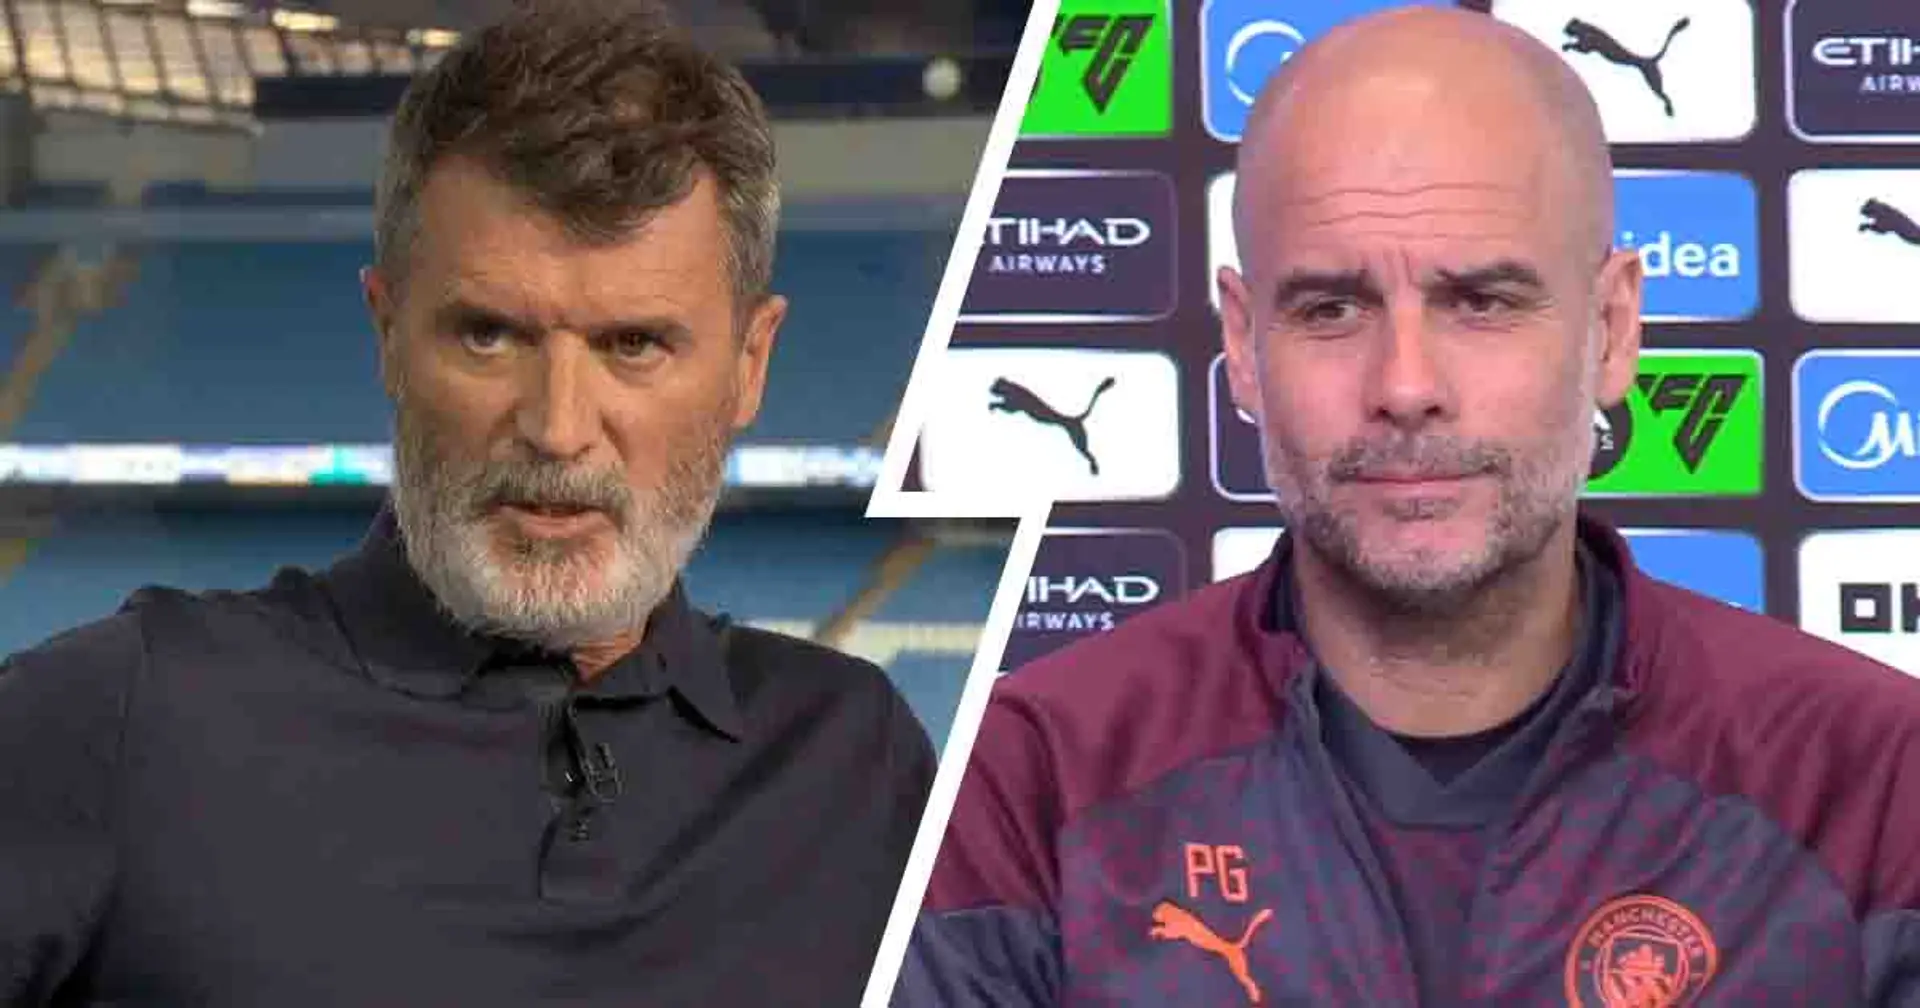 'Same guy who praises Southampton after beating them 5-0': Fans taunt Guardiola after heated Roy Keane exchange